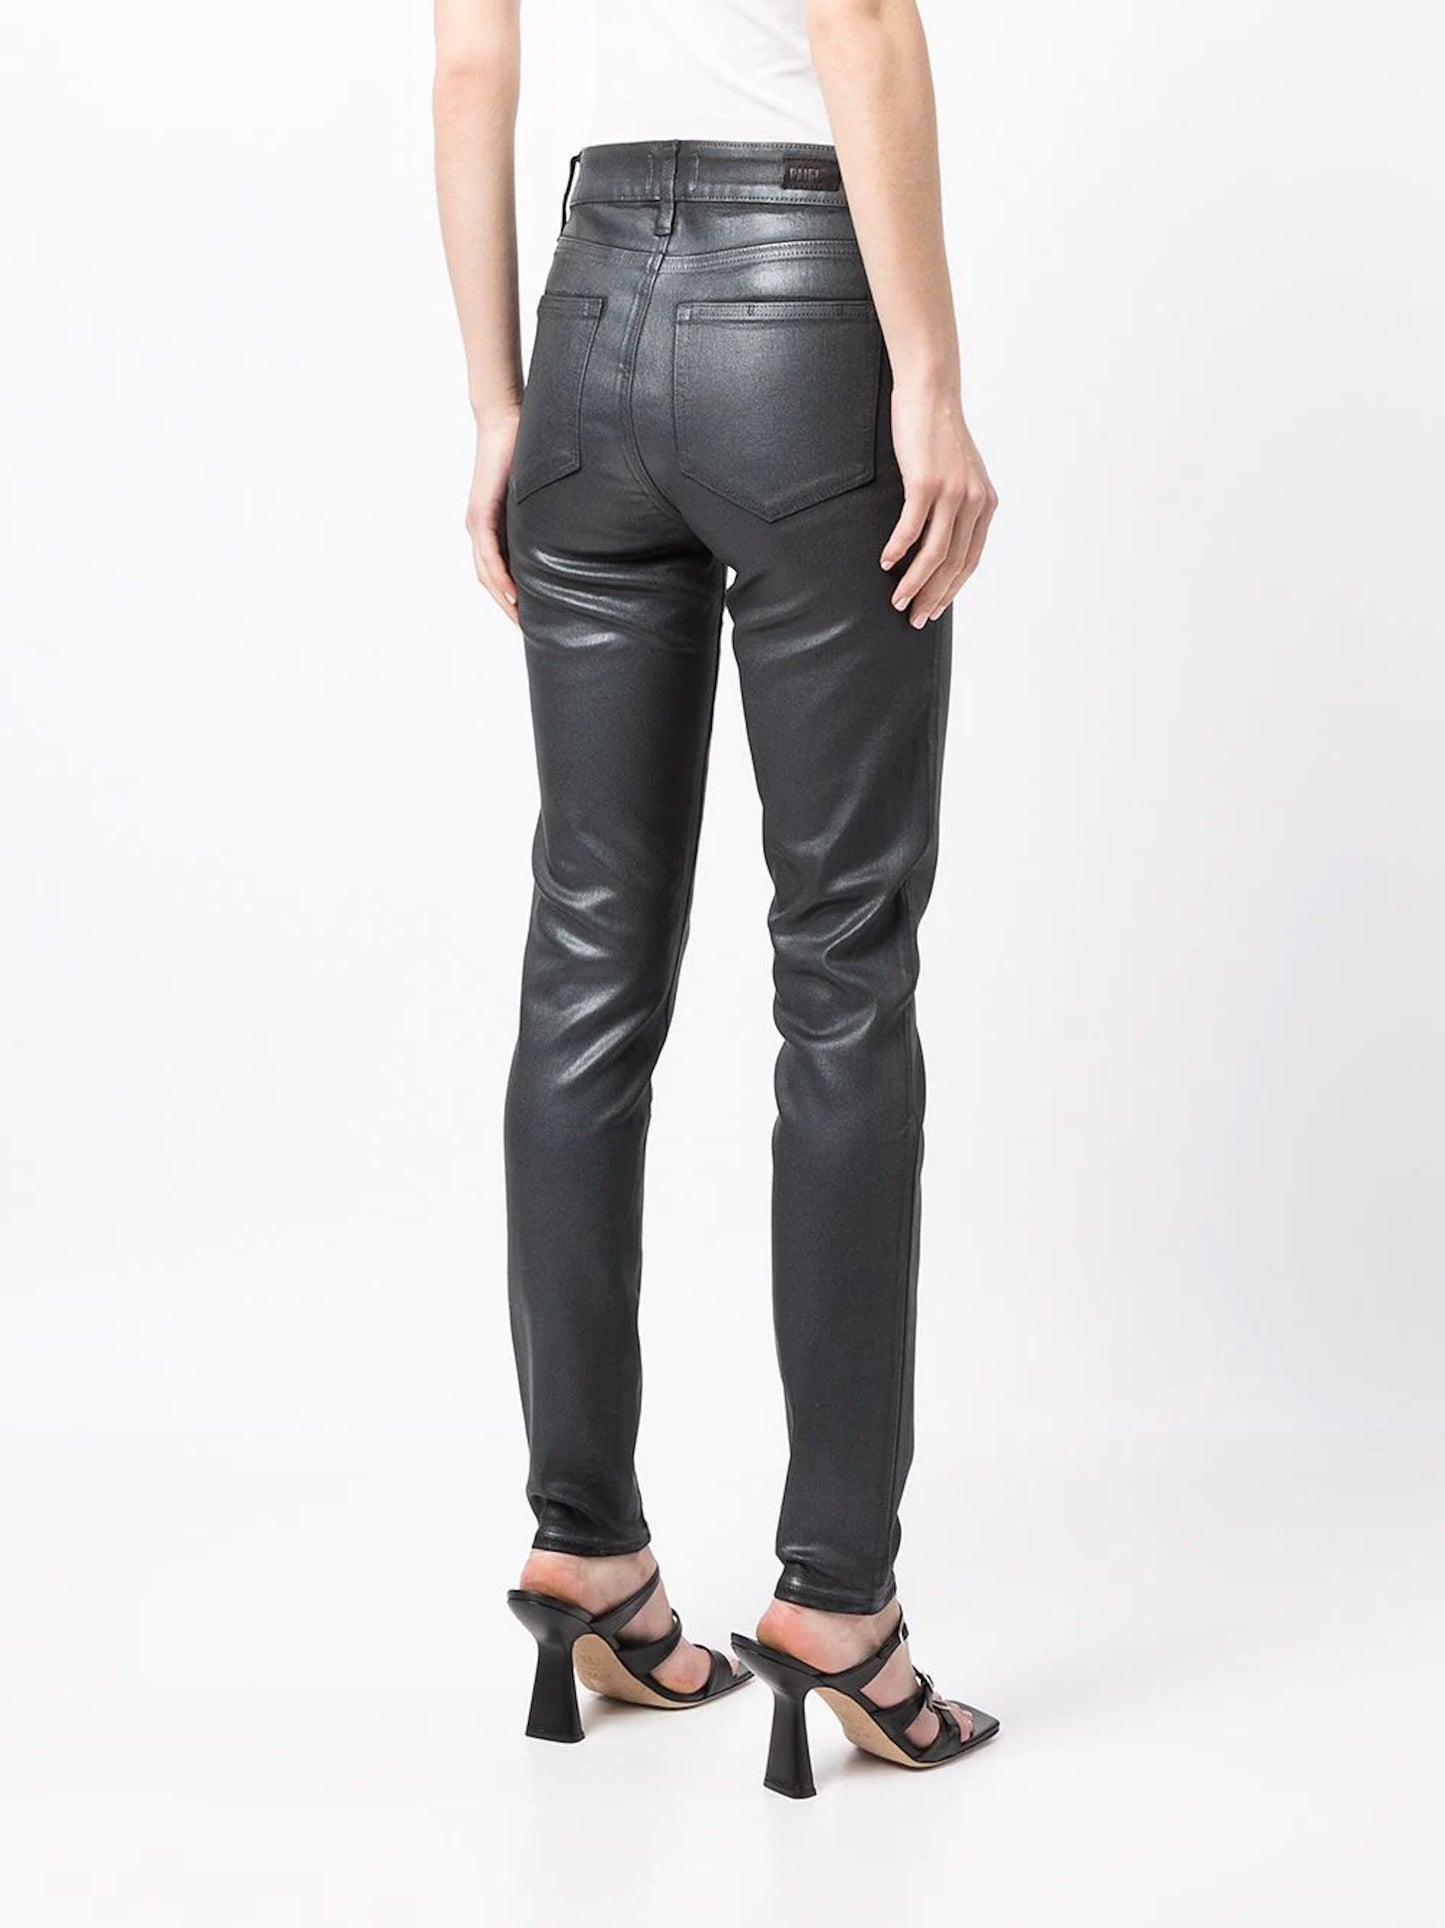 PAIGE Hoxton Ultra Skinny - Pearlized Stone Luxe Coating